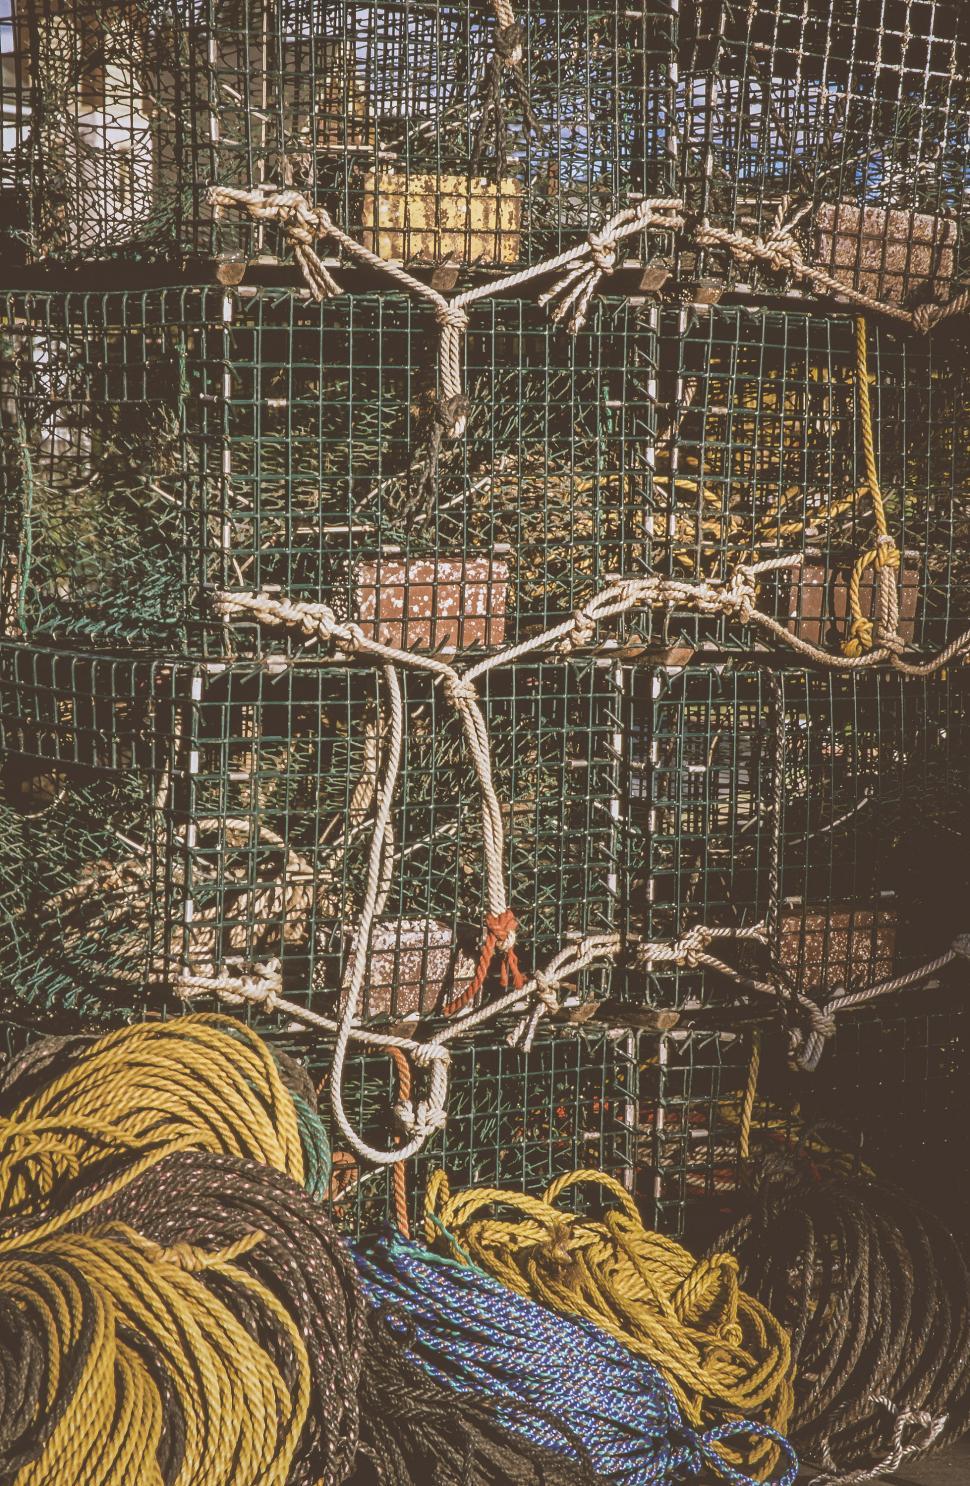 Free Image of Lobster trap cages 